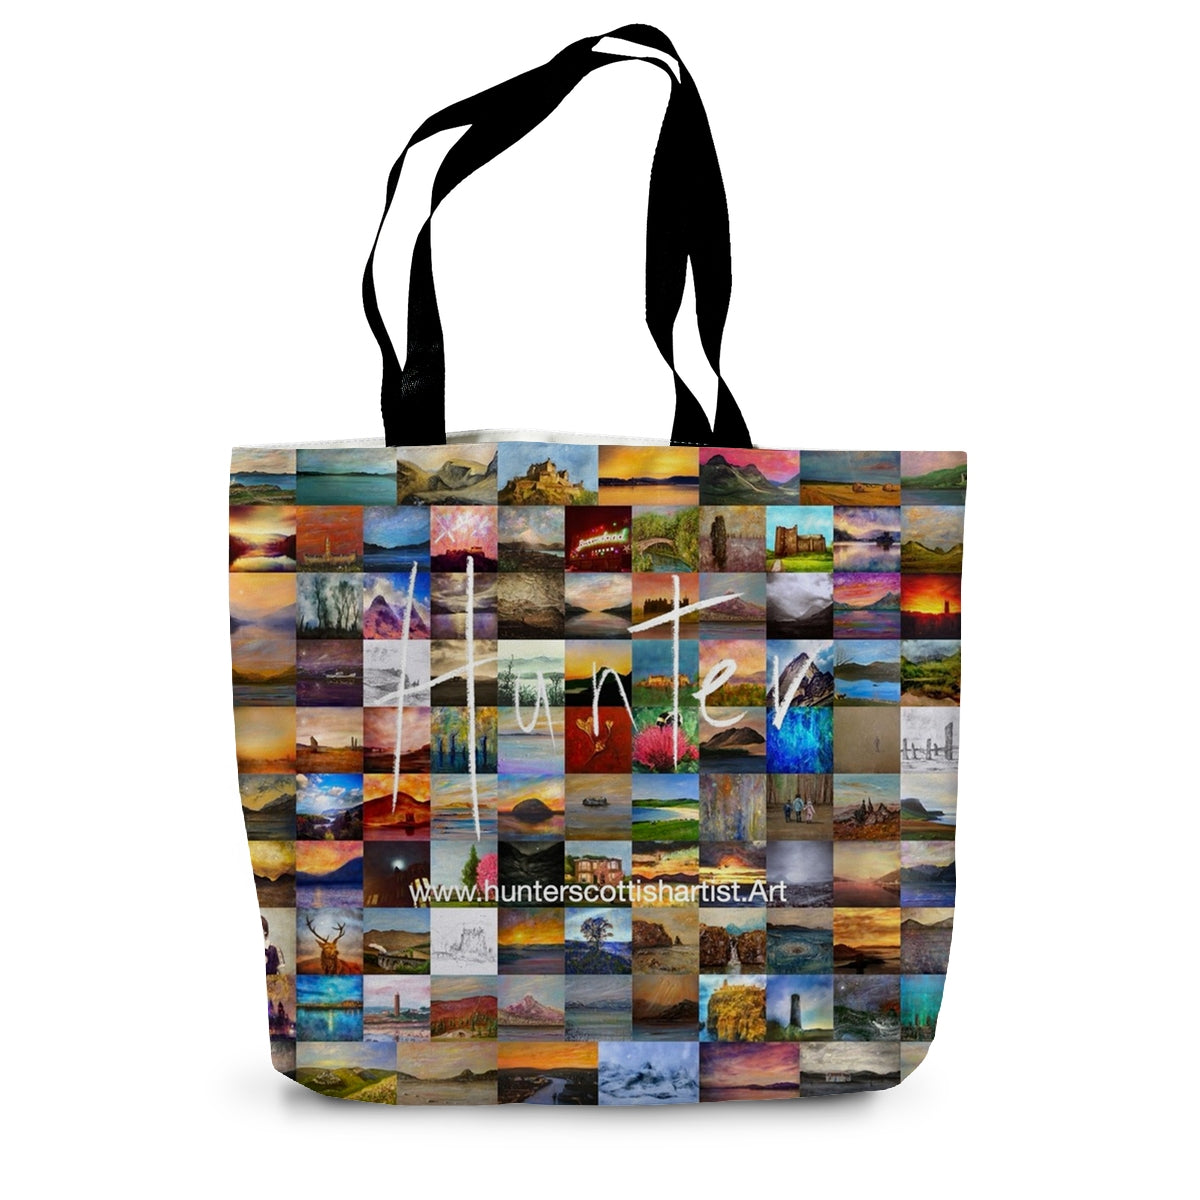 Eilean Donan Castle Art Gifts Canvas Tote Bag-Bags-Historic & Iconic Scotland Art Gallery-14"x18.5"-Paintings, Prints, Homeware, Art Gifts From Scotland By Scottish Artist Kevin Hunter